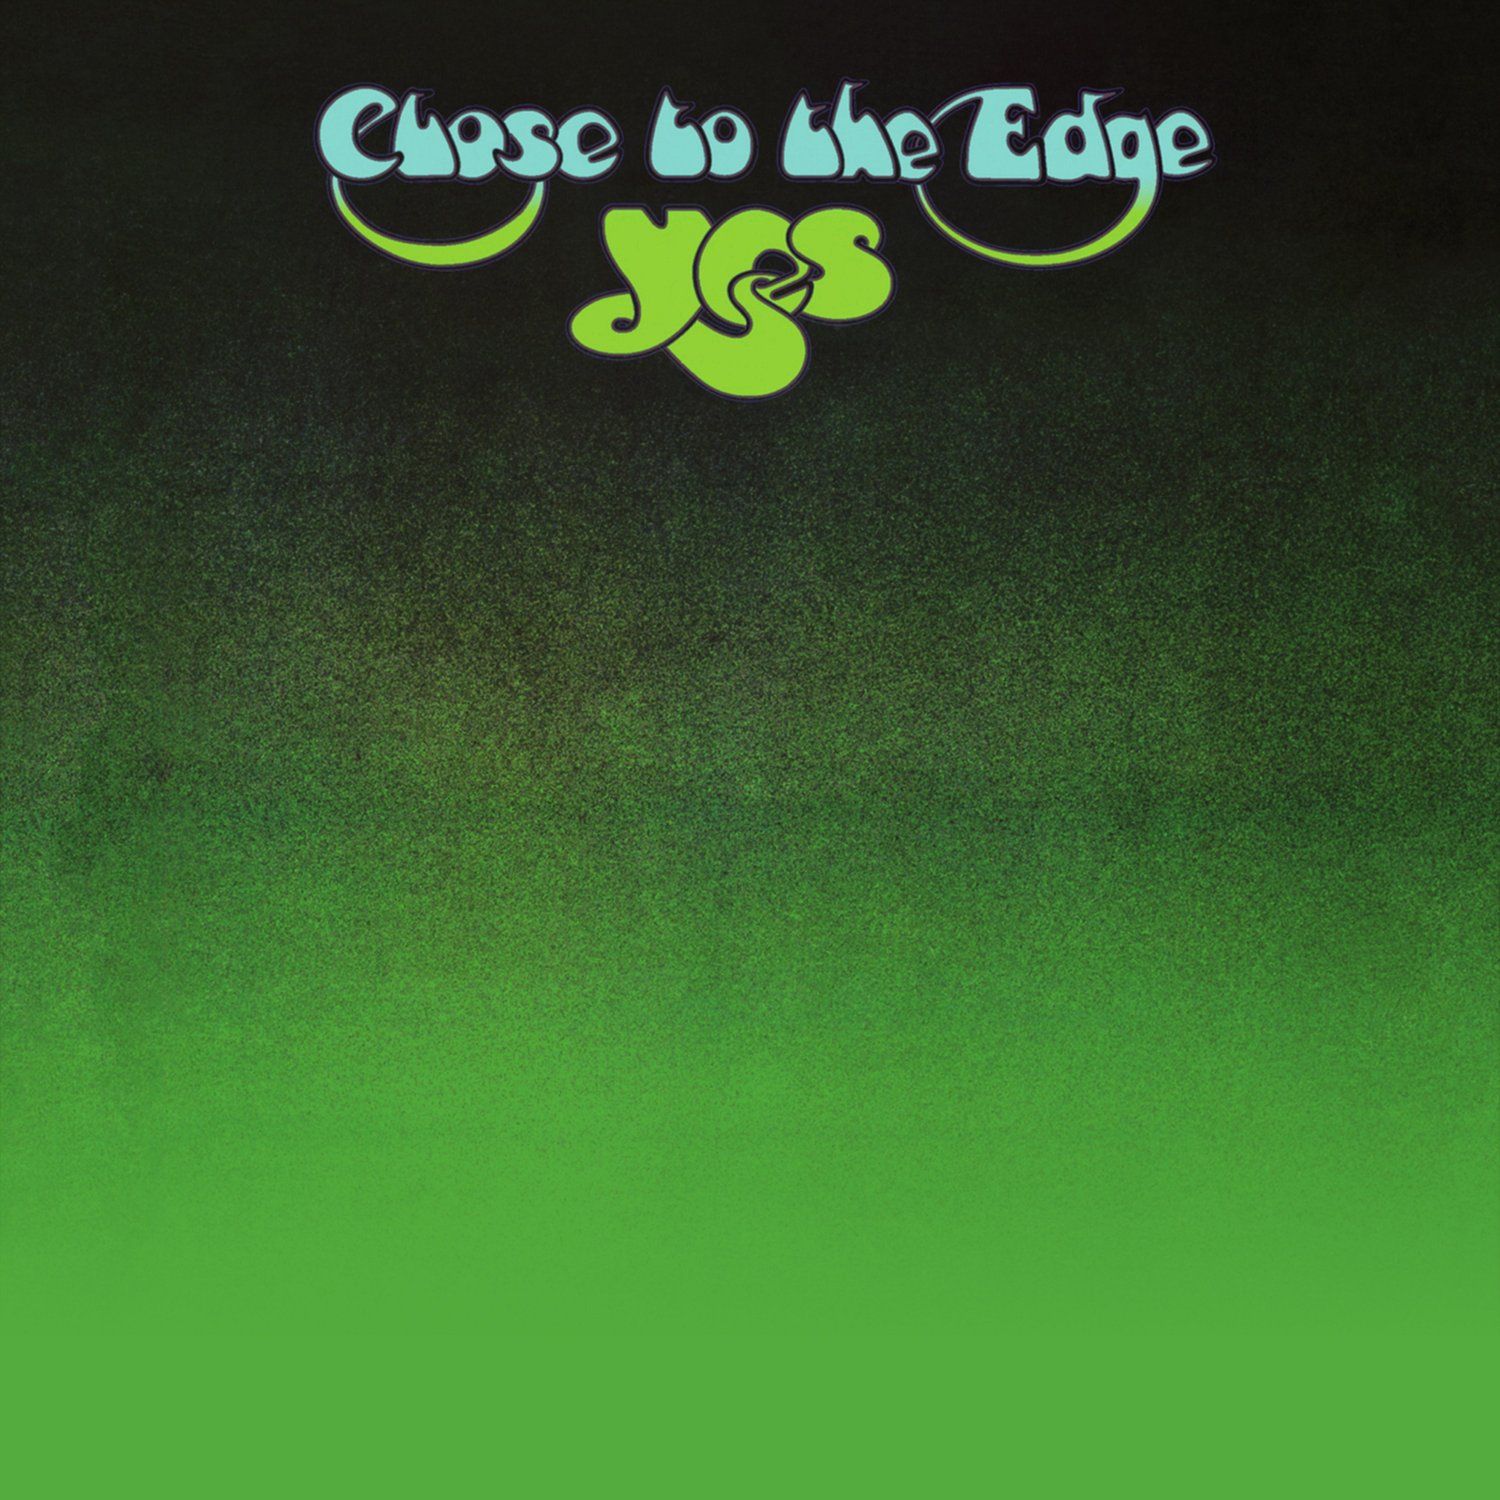 YES Close to the Edge BANNER Huge 4X4 Ft Fabric Poster Tapestry Flag Print album cover art